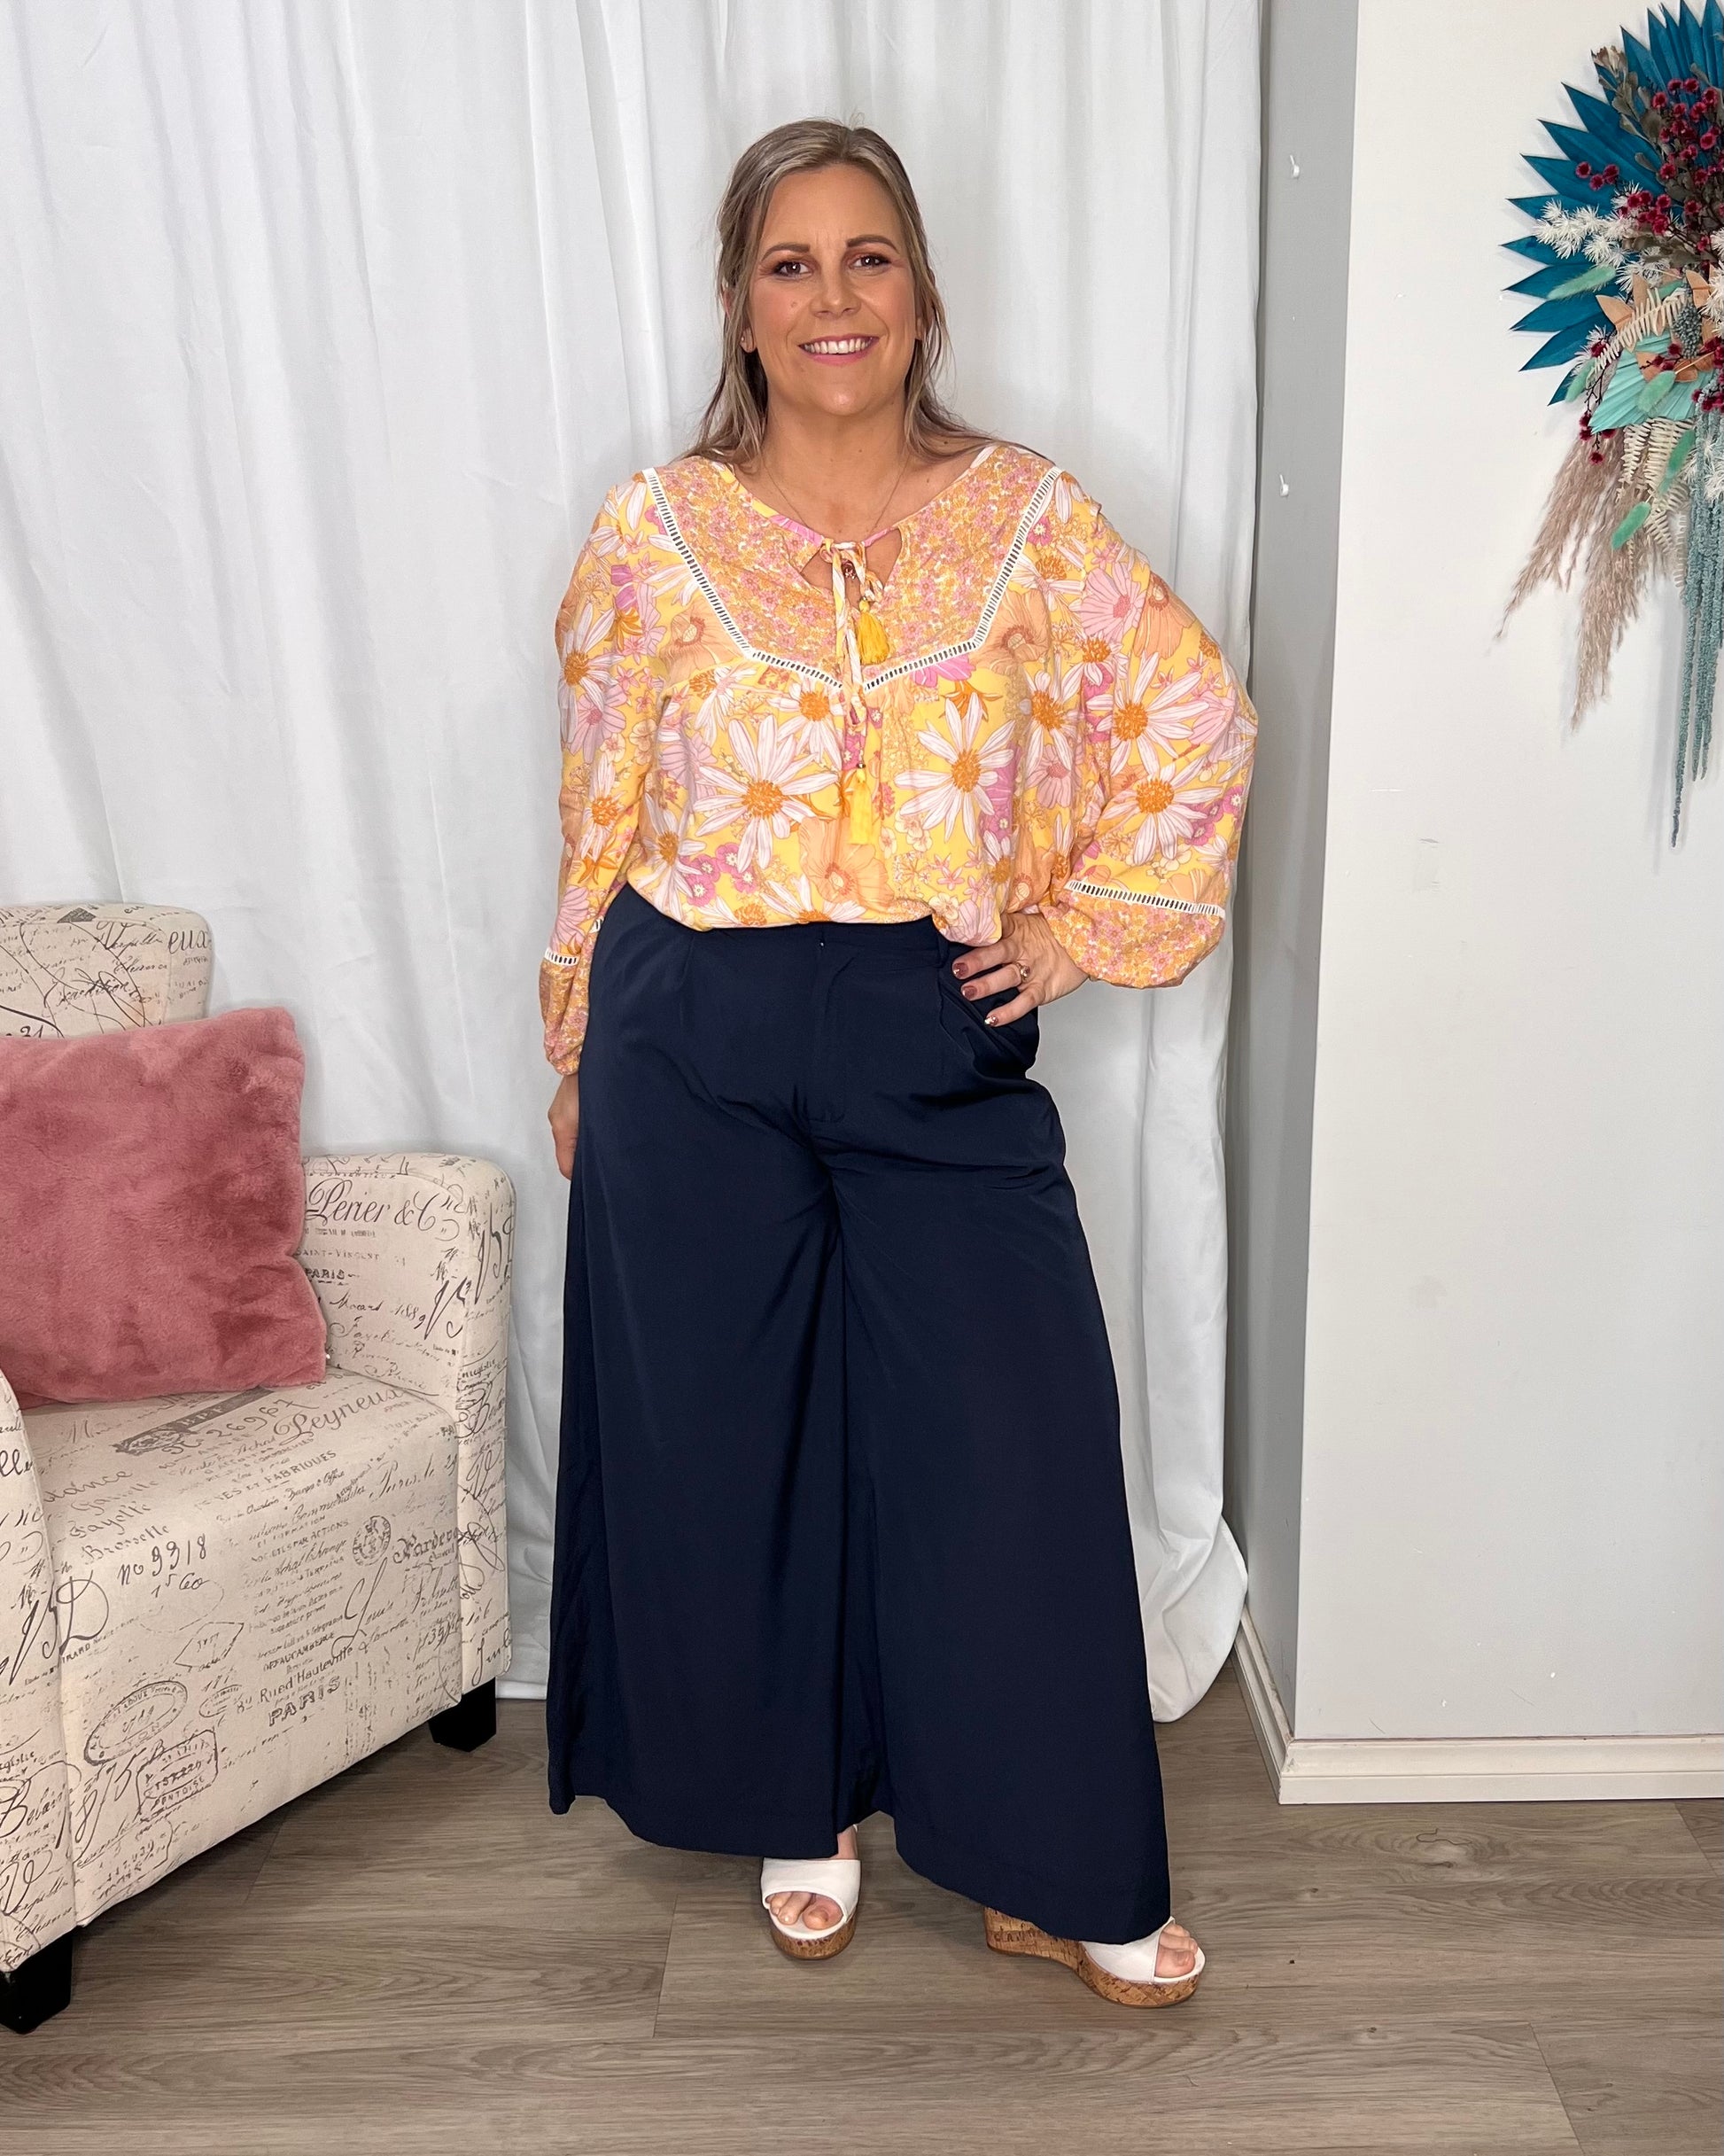 Lillian Palazzo Pants: The Lillian Palazzo Pants are a stunning shape to take you from office to after hours, year round. The pleats at the top streamline into a wide leg for the utmost in - Ciao Bella Dresses - Sass Clothing